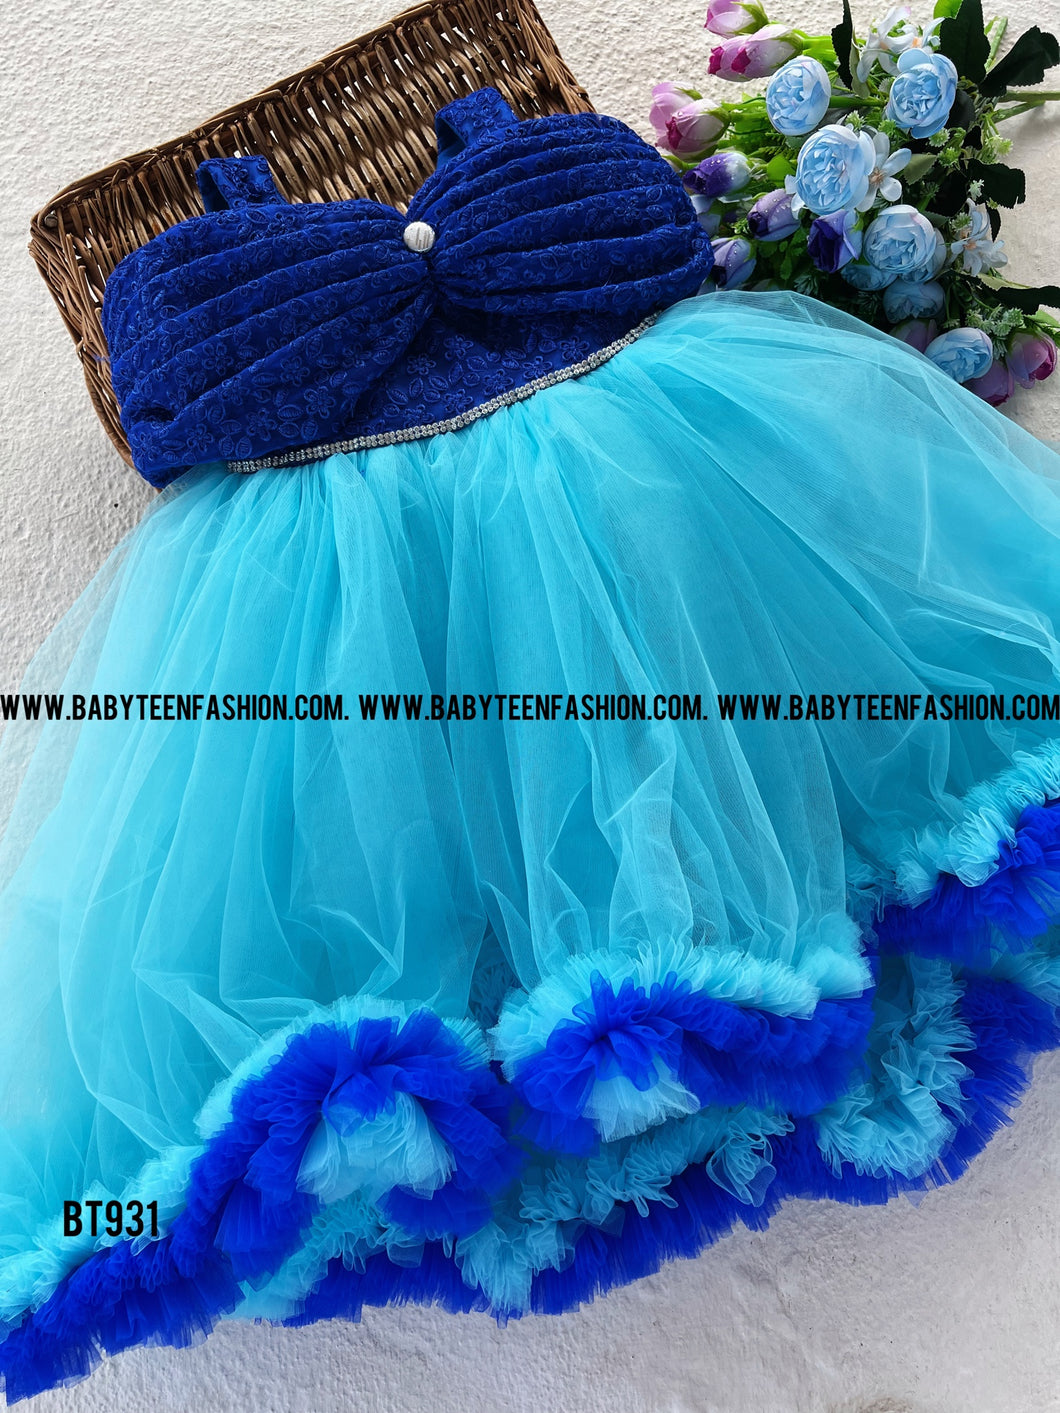 BT931 Princess Gown in Shades of Blue